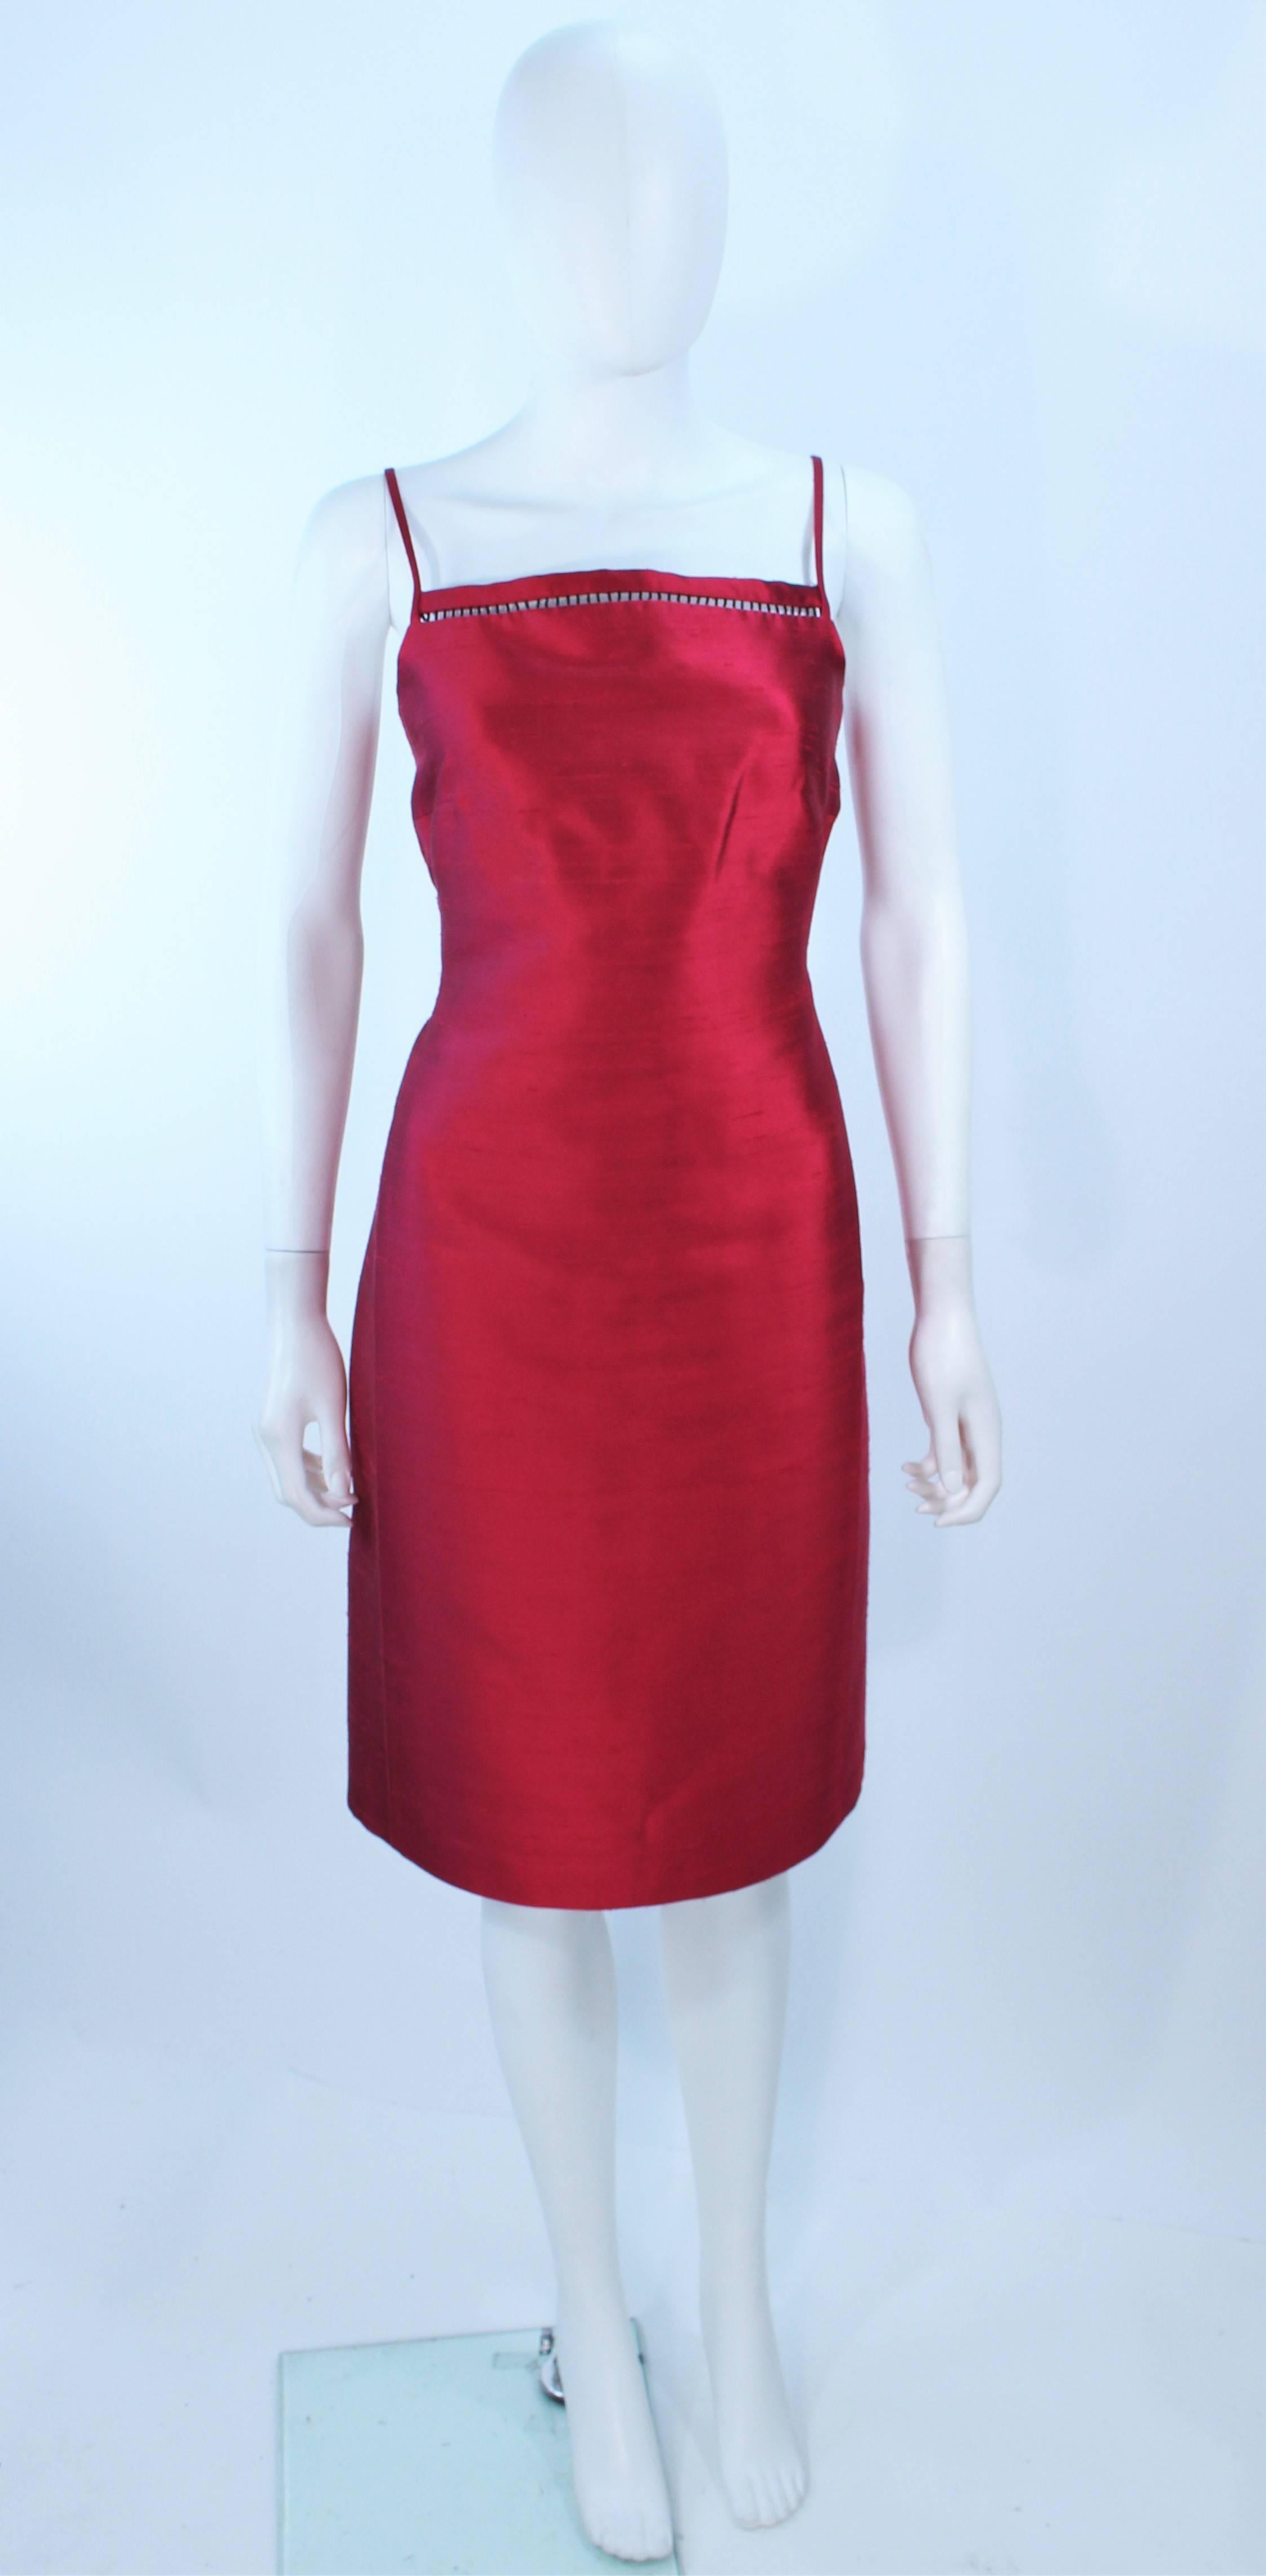 This Oscar De La Renta cocktail dress is composed of a red silk in a cranberry hue. Features a black beaded bust detail. There is a center back zipper clousure. In excellent pre-owned condition.

**Please cross-reference measurements for personal